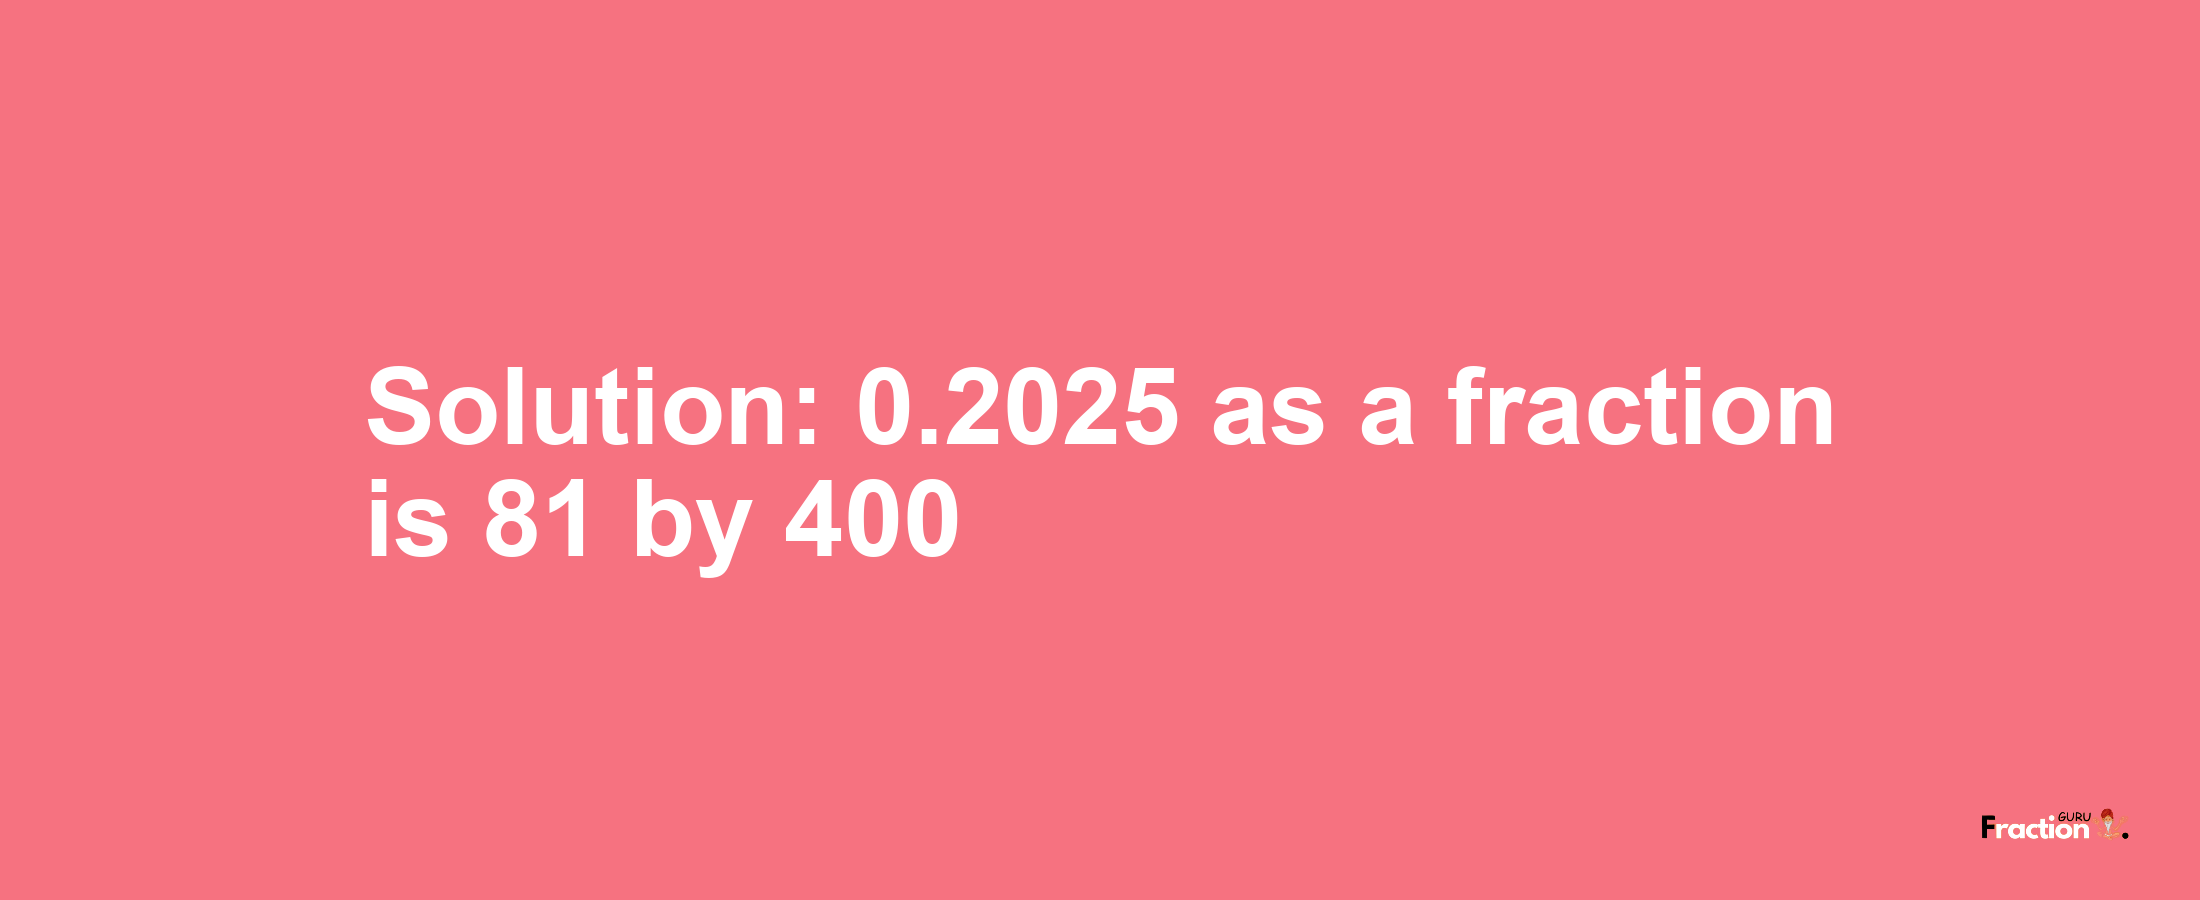 Solution:0.2025 as a fraction is 81/400